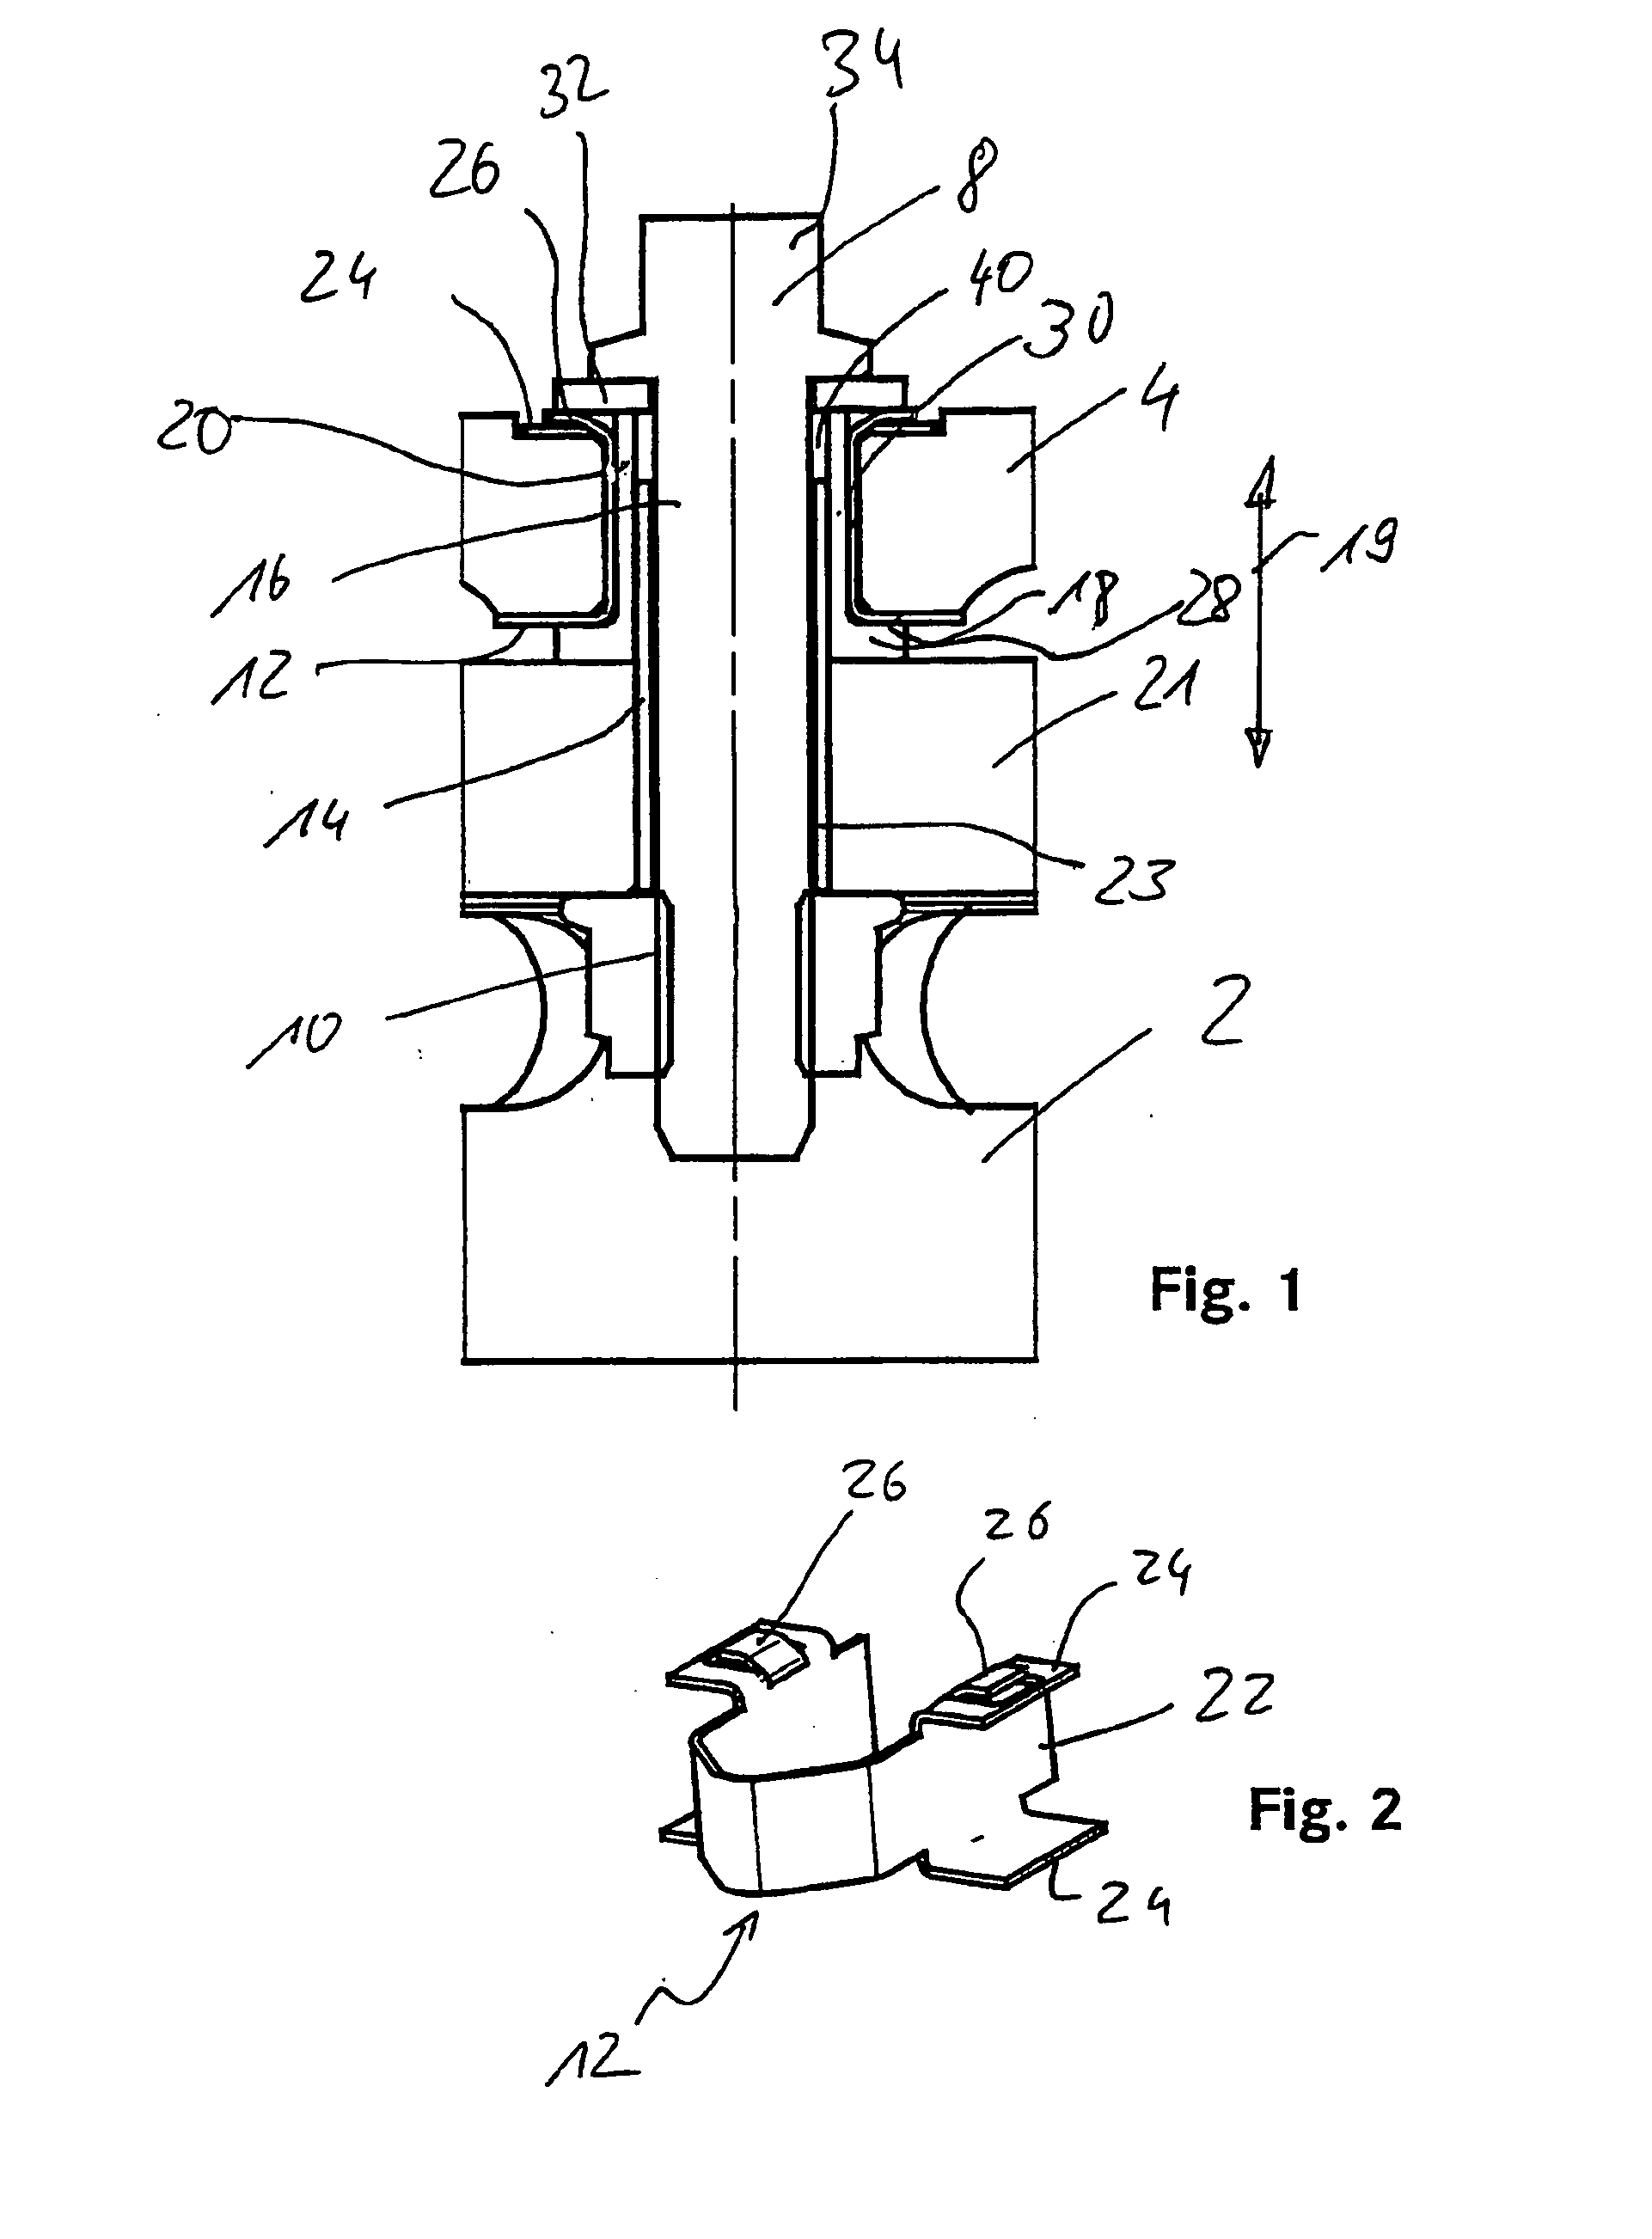 Brake disk comprising a friction ring and a linking element